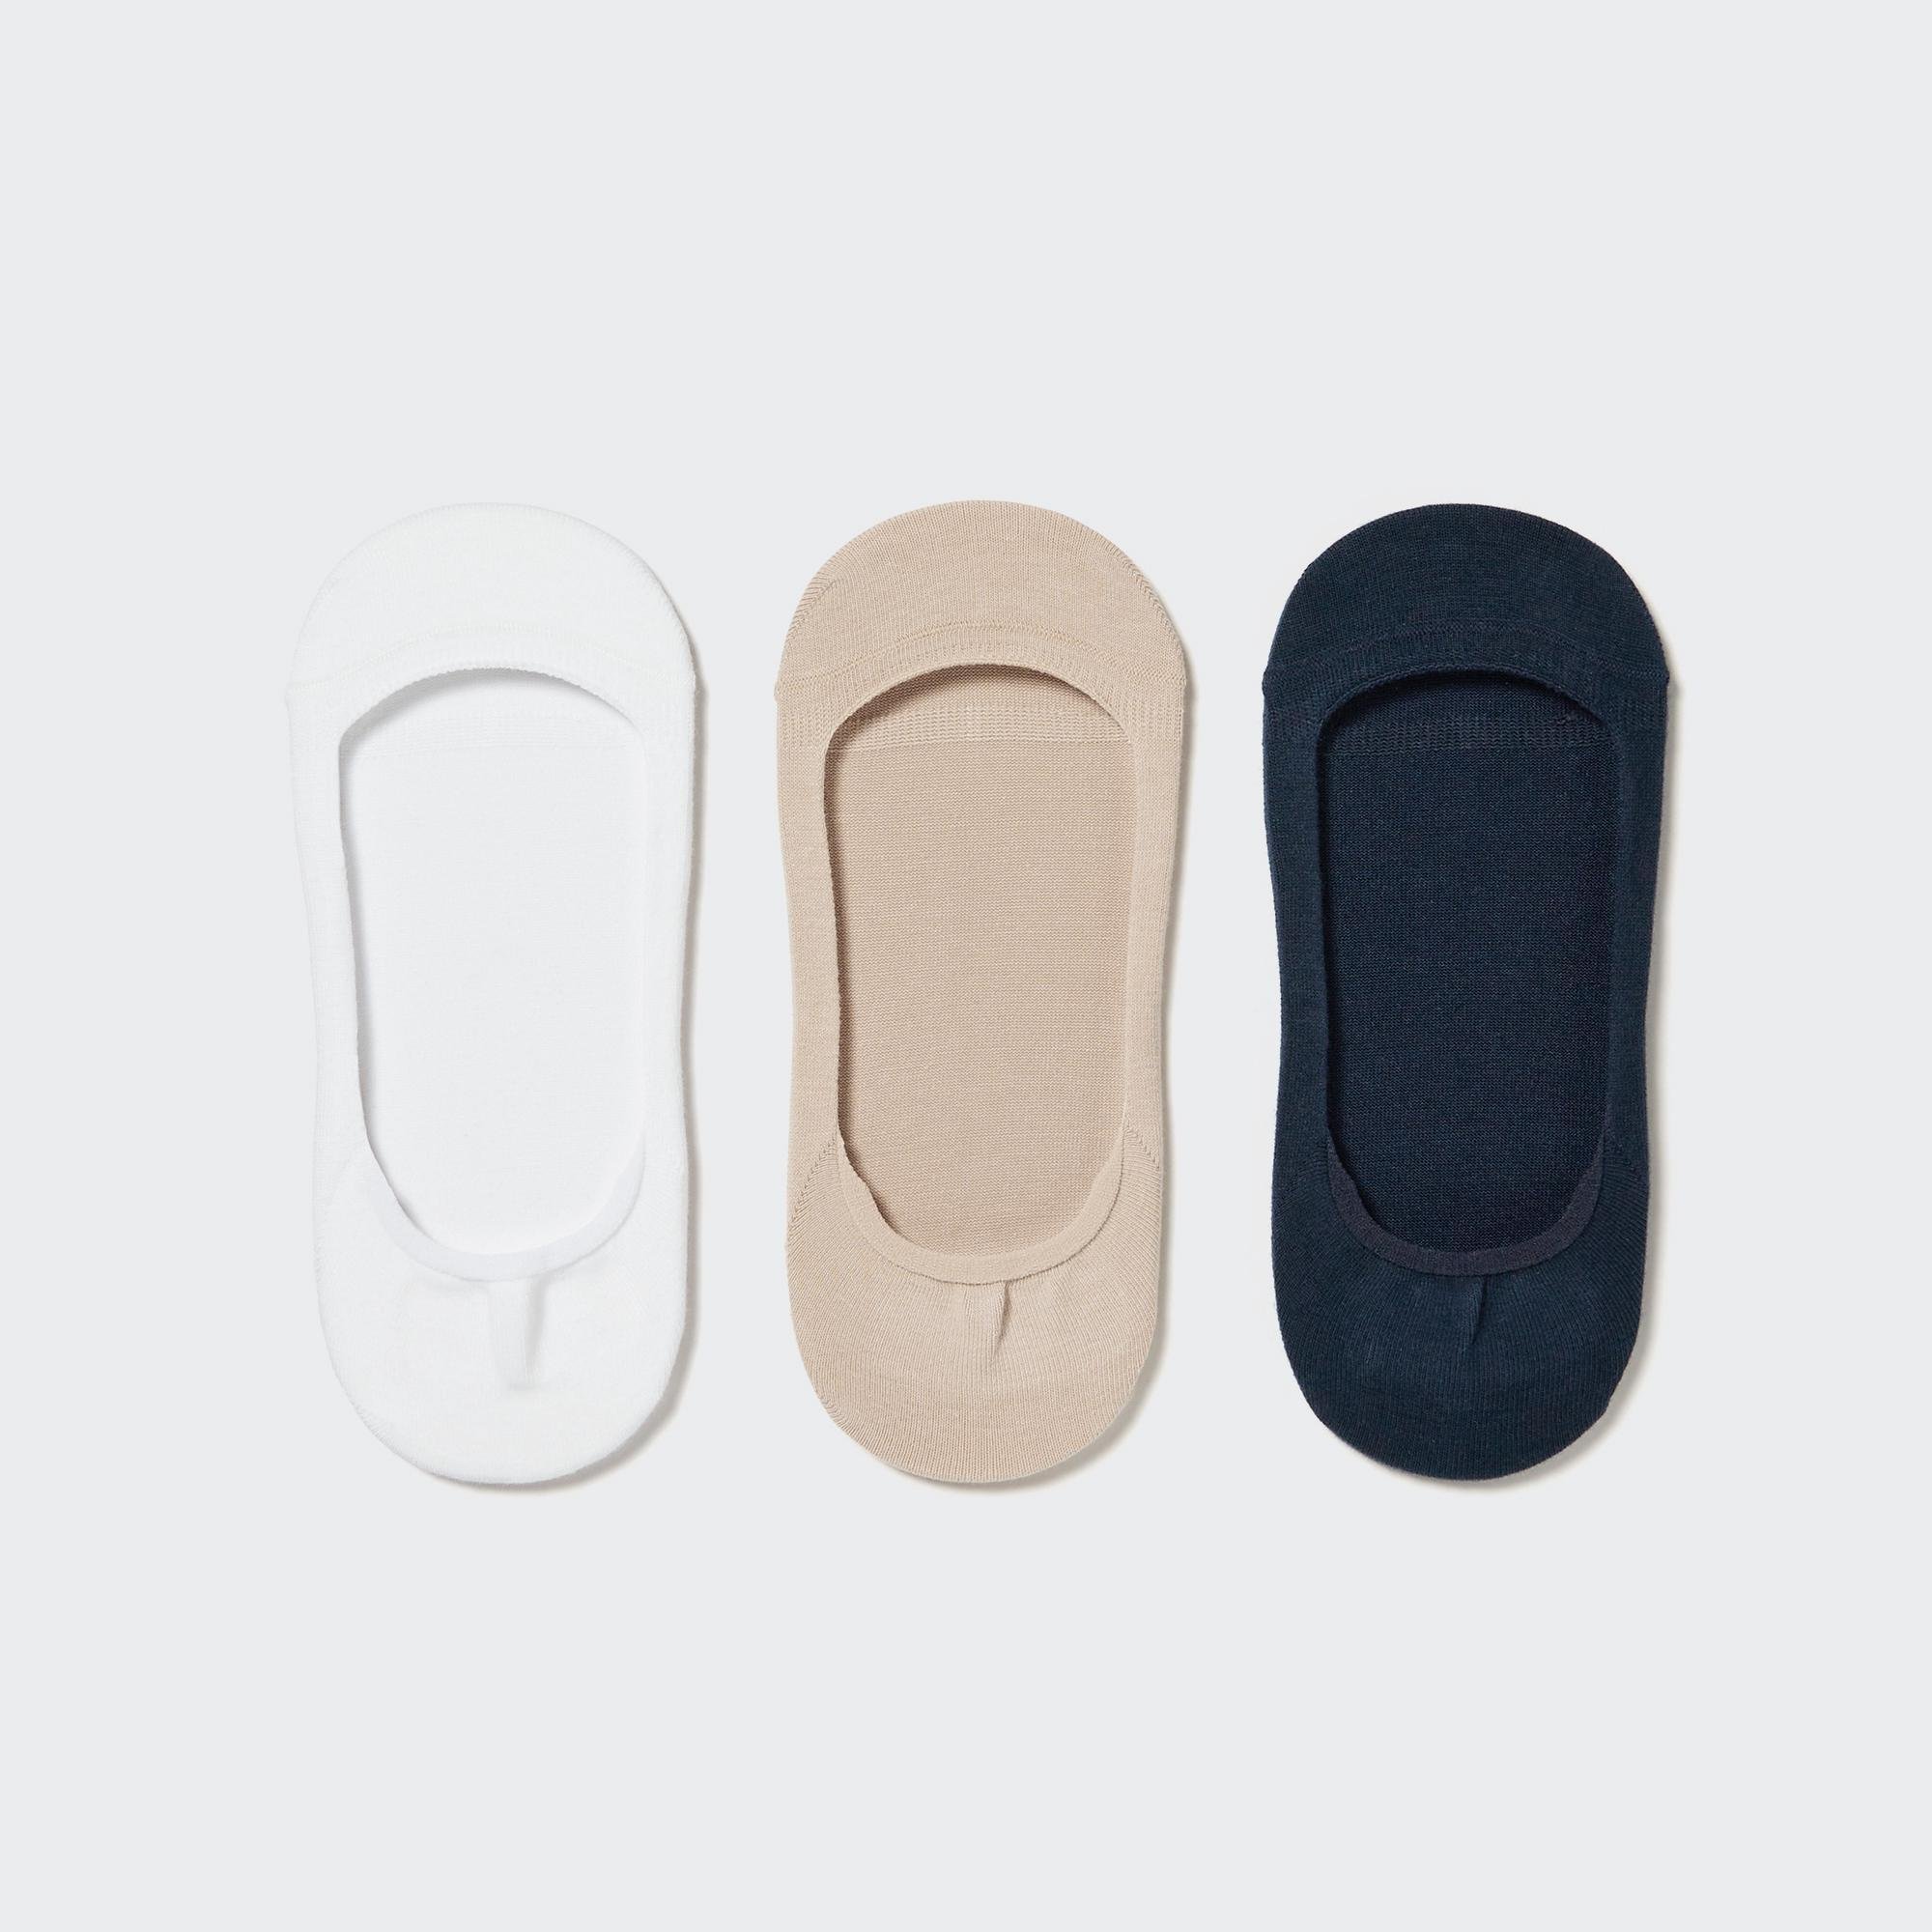 Footsies 3 Pack (Low Cut) by UNIQLO